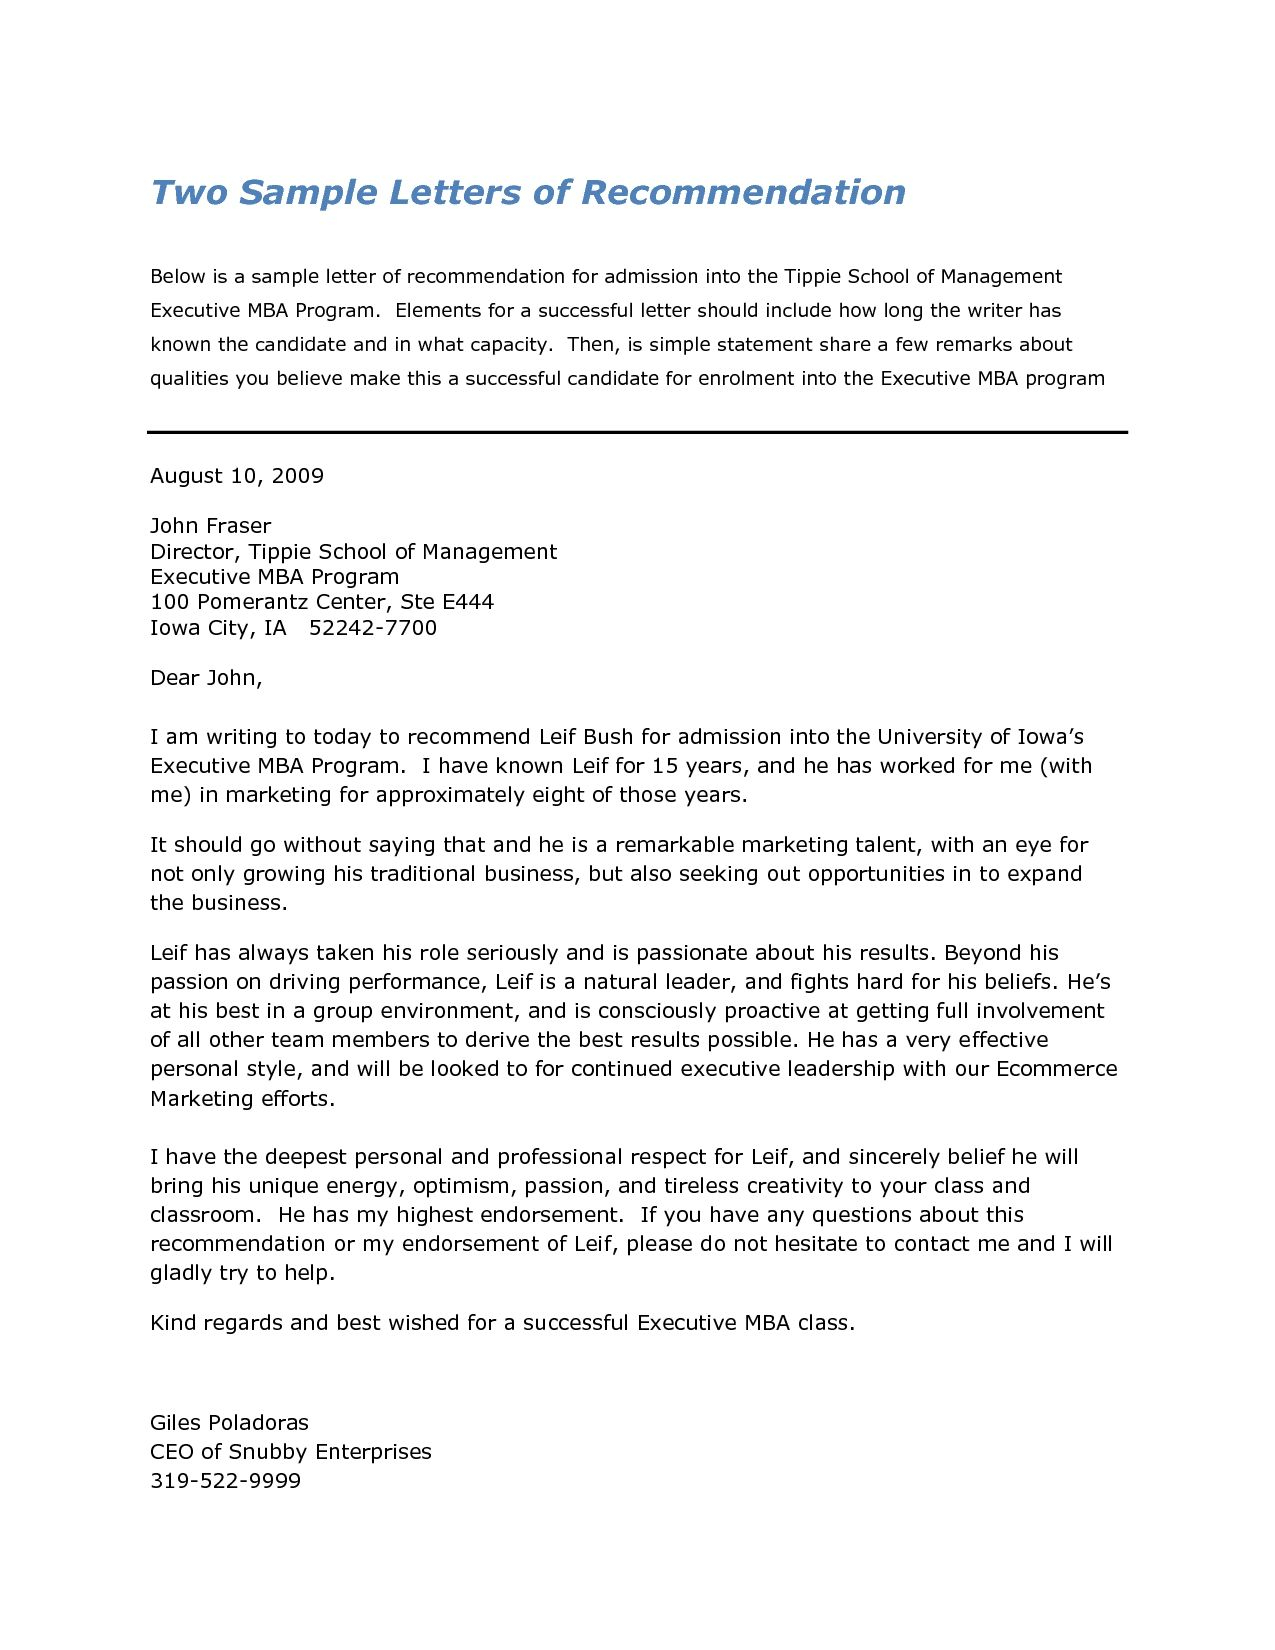 Recommendation Letter For Harvard Business School Pertaining in dimensions 1275 X 1650